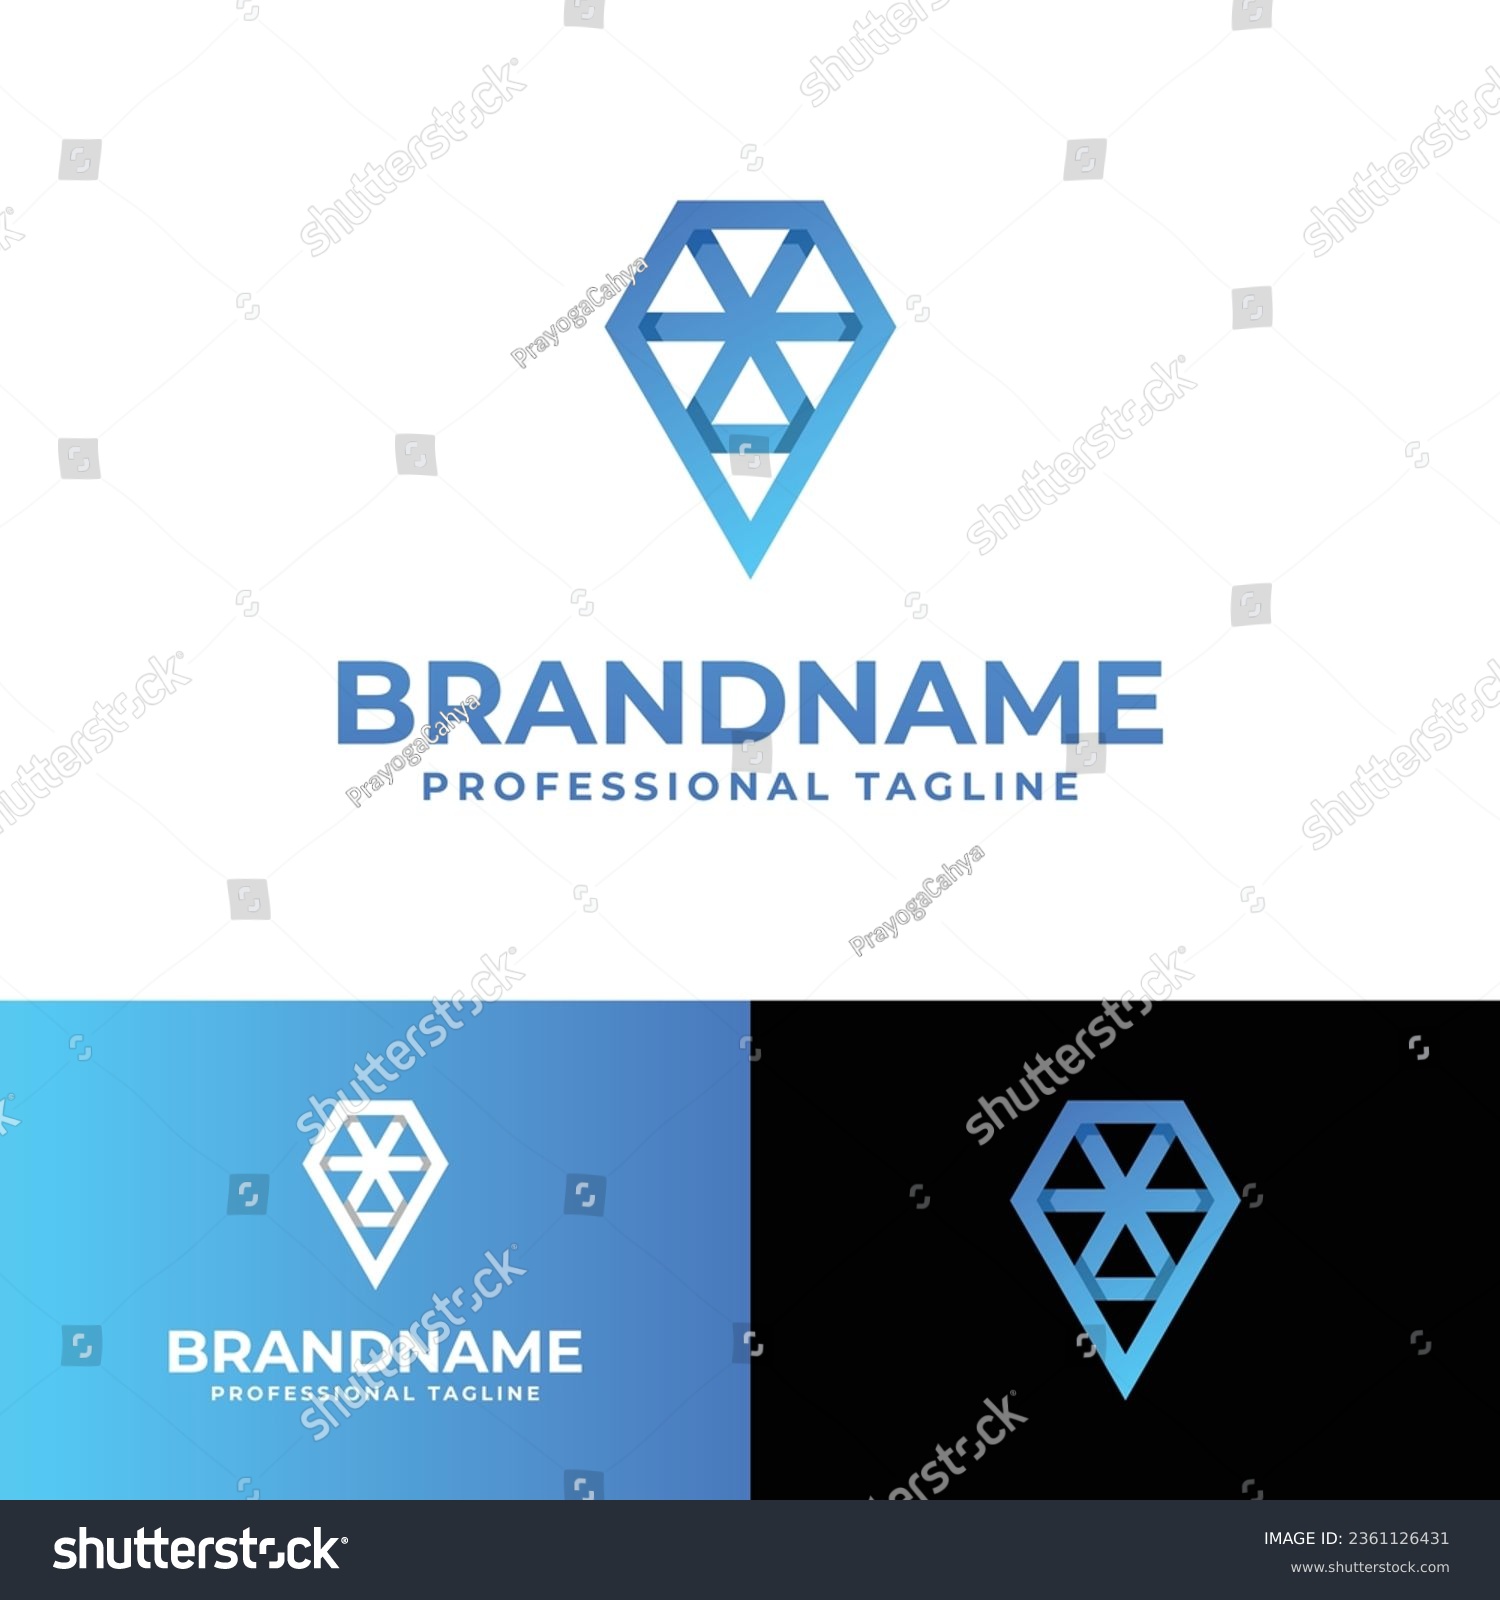 SVG of Letter V Diamond Technology Logo, suitable for any business related to Diamond with V initial. svg